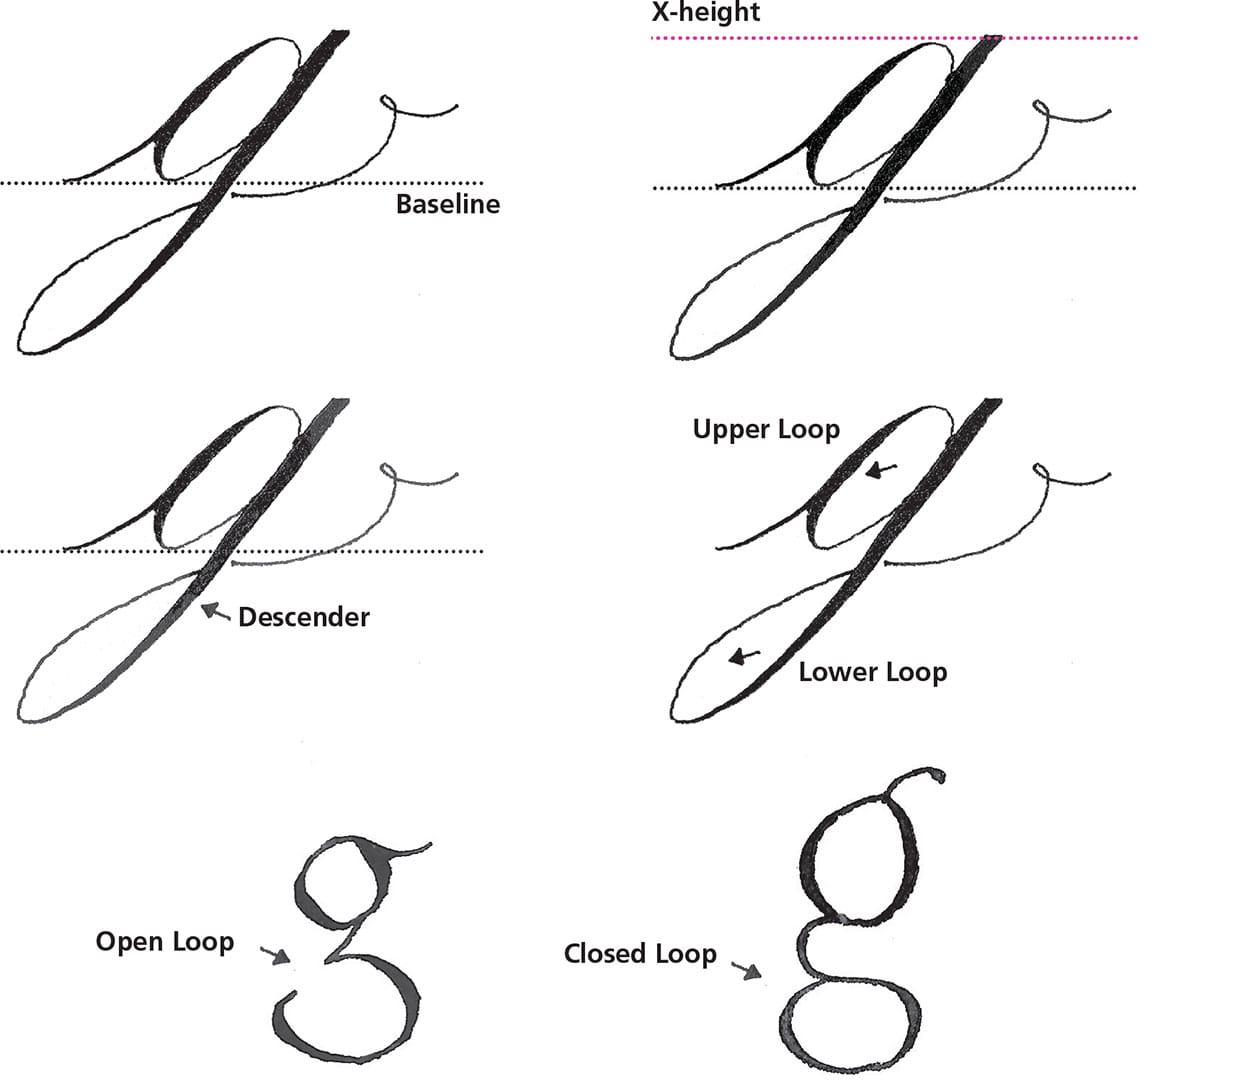 There are four key lines in calligraphy baseline x-height cap height and - photo 12